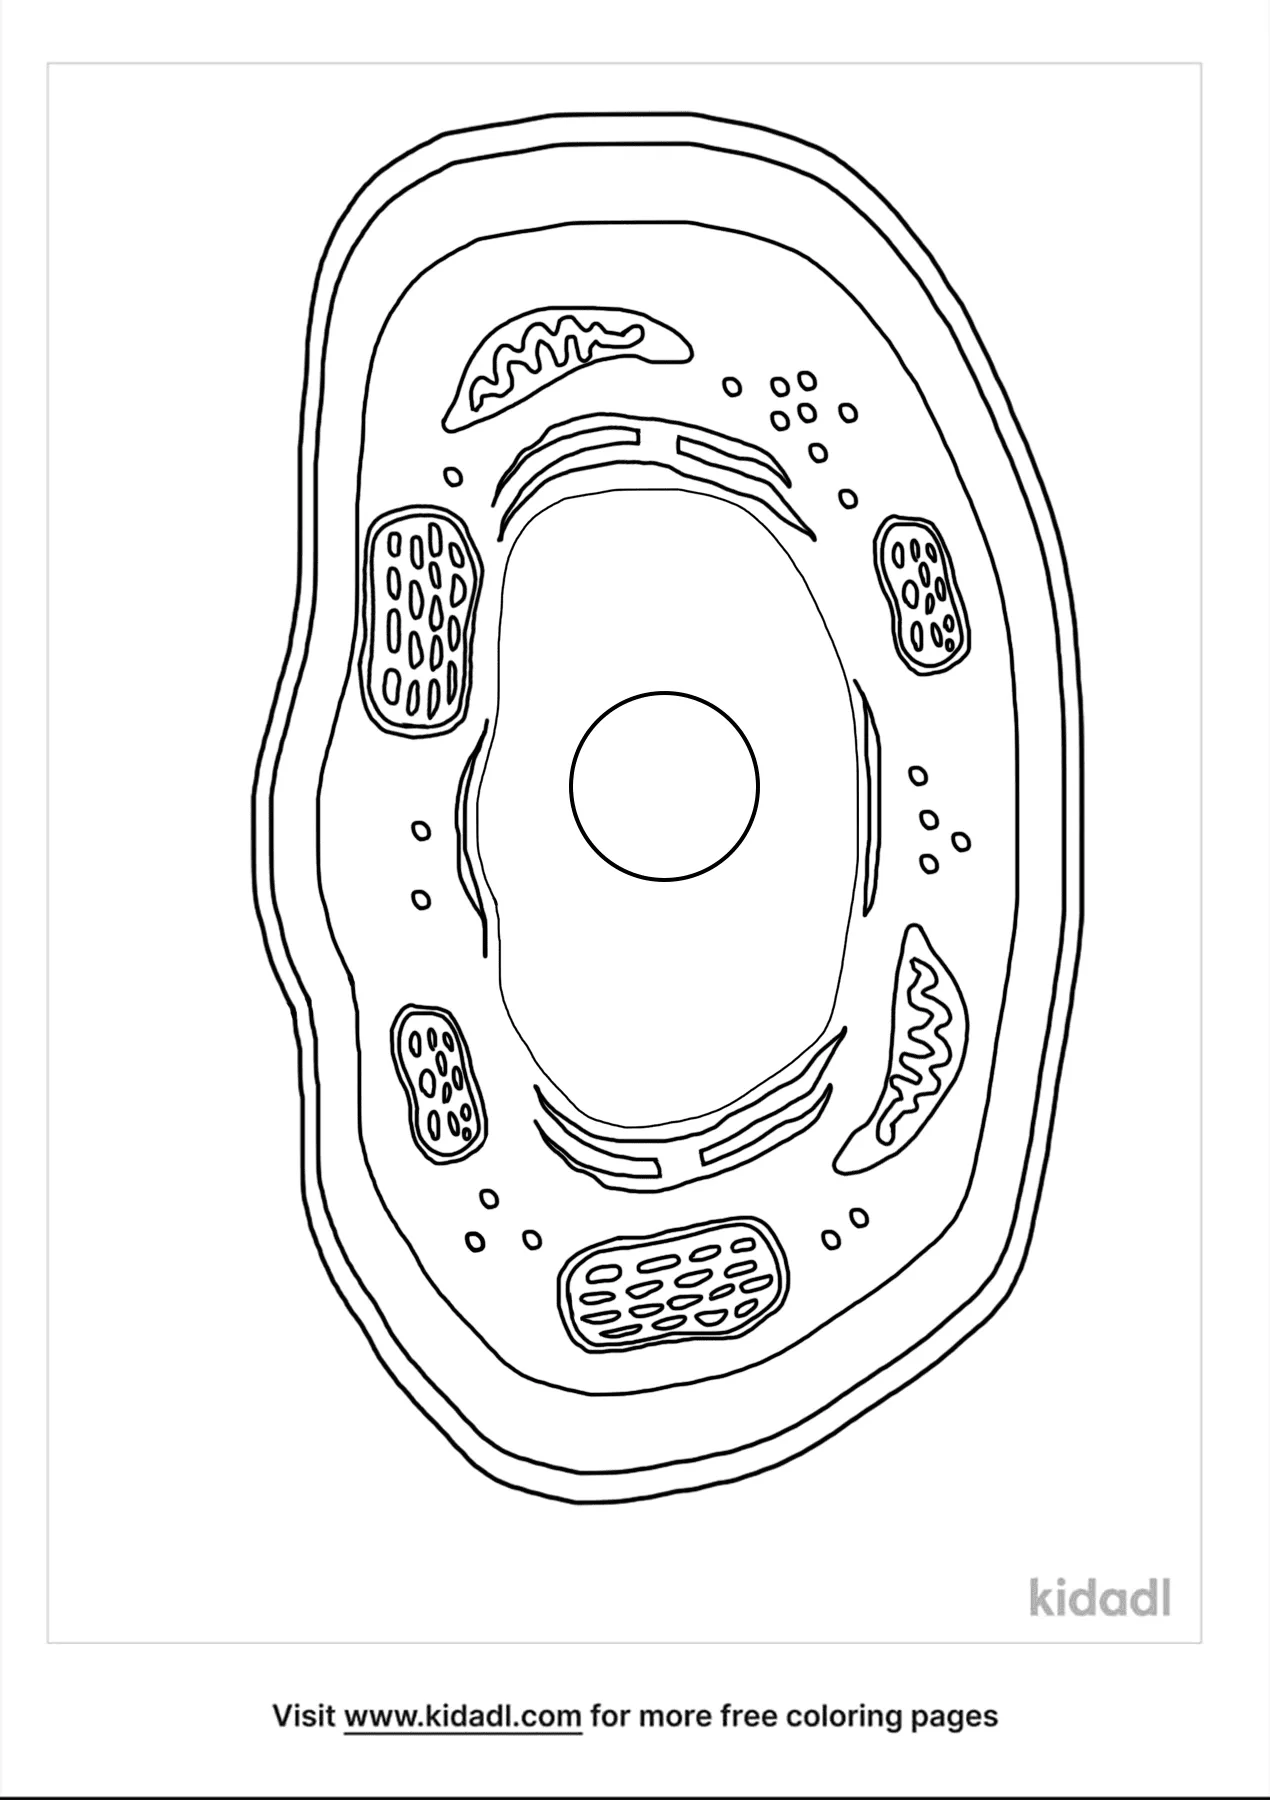 Plant Cell Coloring Pages  Free Plants Coloring Pages  Kidadl Throughout Plant Cell Coloring Worksheet